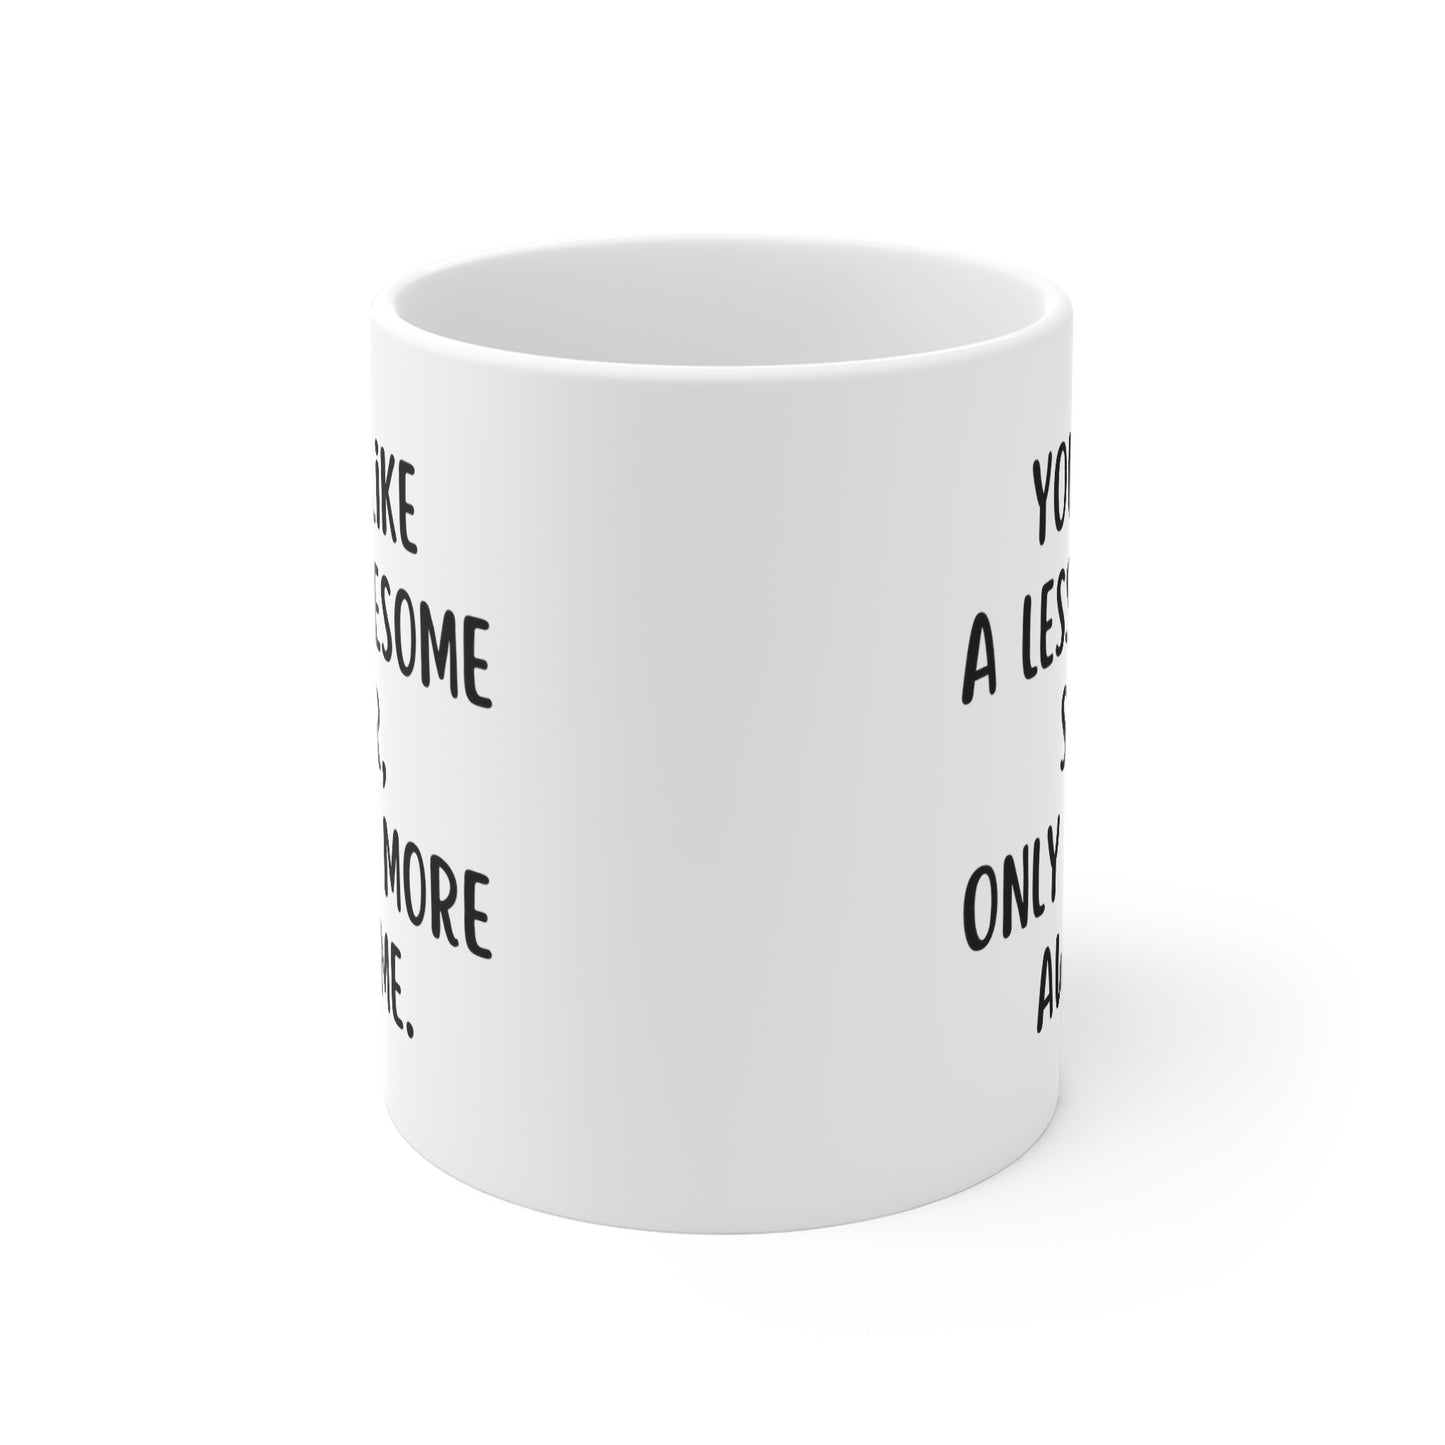 You're Like A Less Awesome Sister, Only Way More Awesome | Funny, Snarky Gift | White Ceramic Mug, Fun Block Font